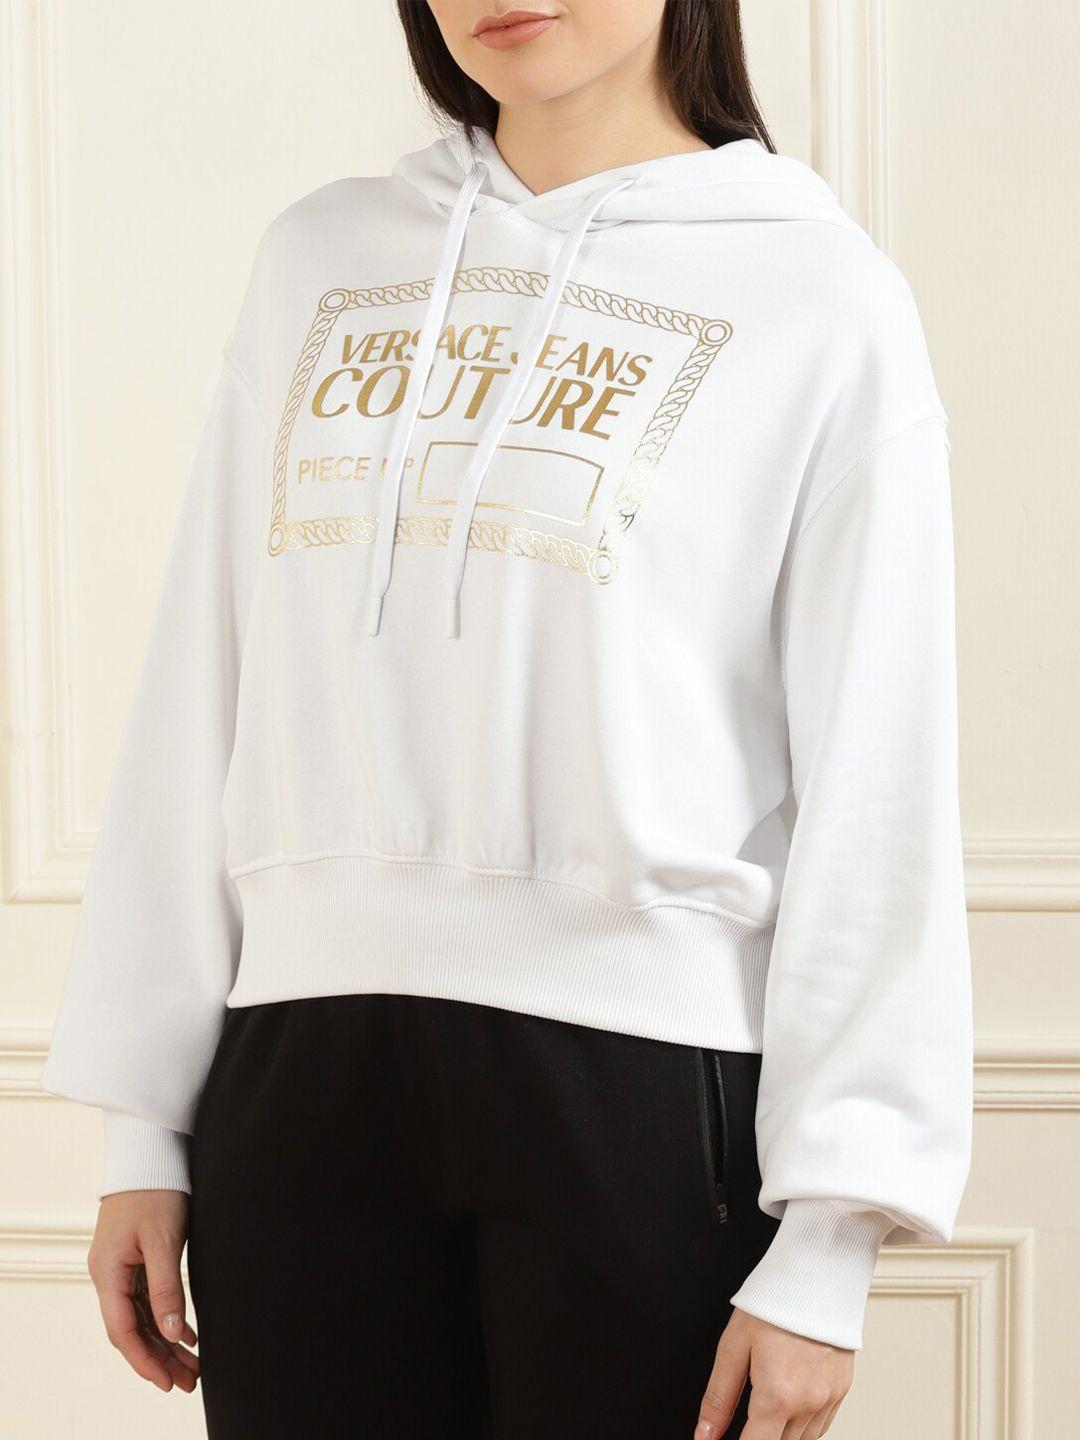 versace-jeans-couture-women-white-vjc-brand-printed-hooded-pure-cotton-sweatshirt